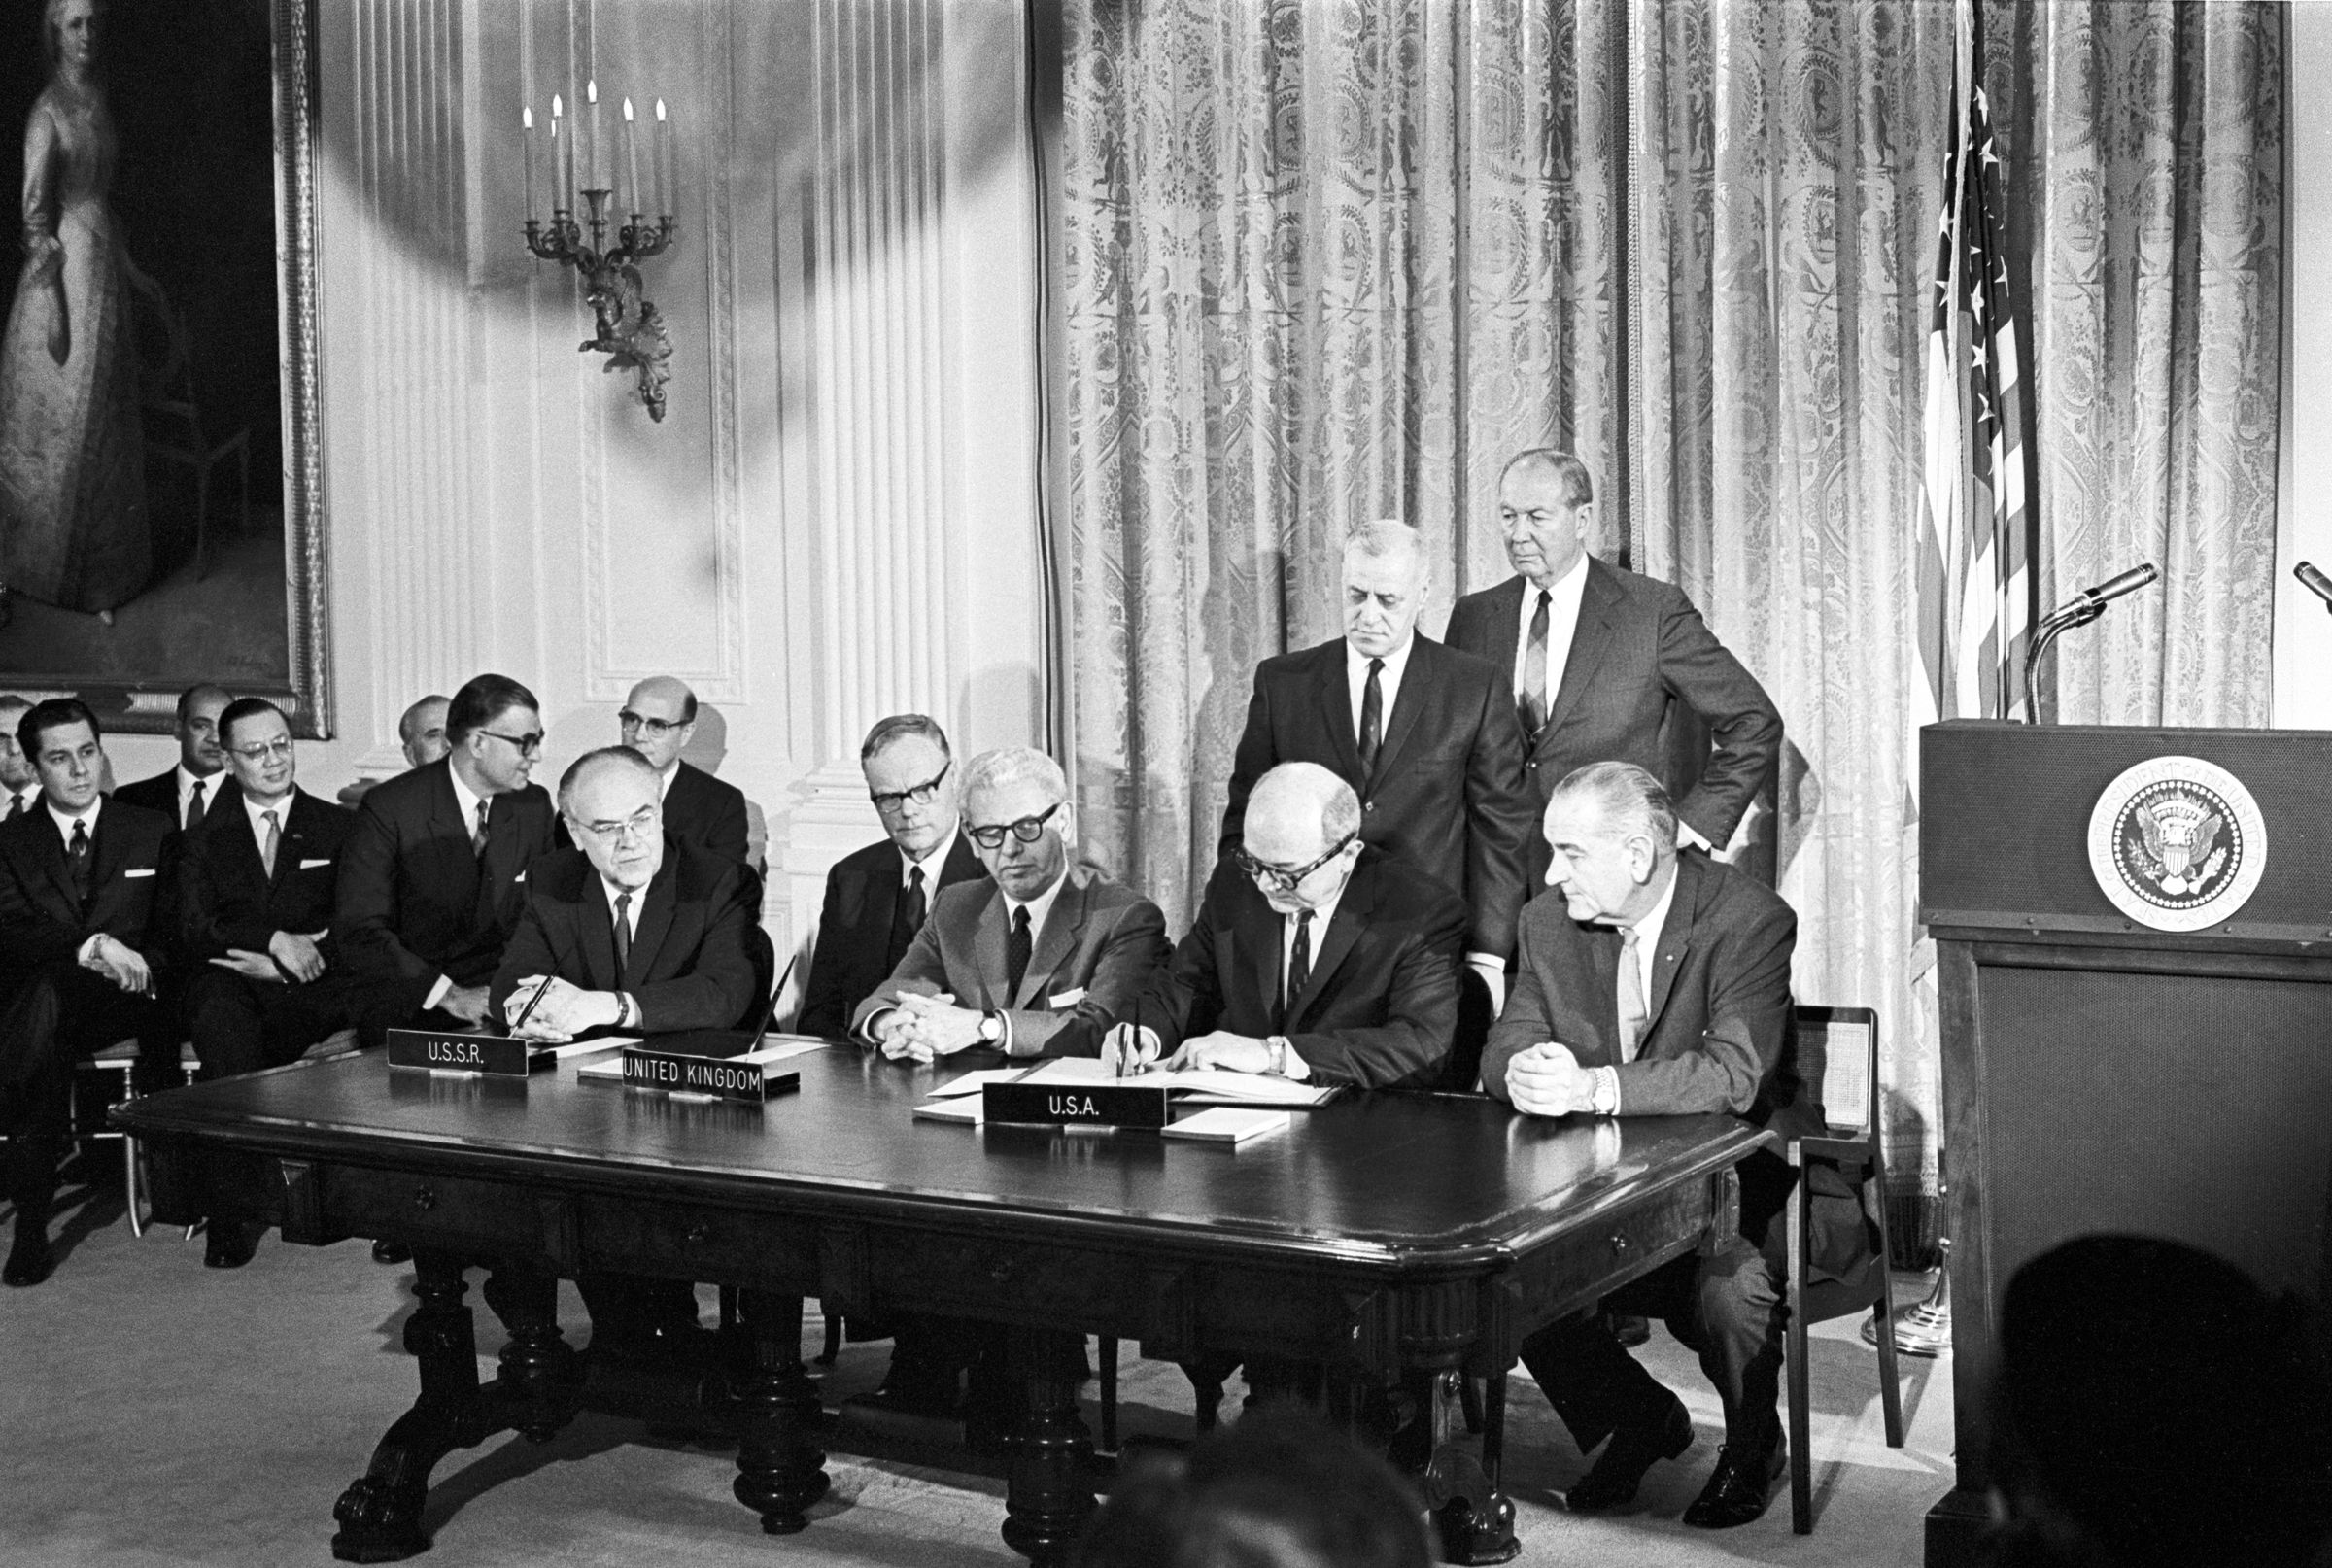 The signing of the Outer Space Treaty